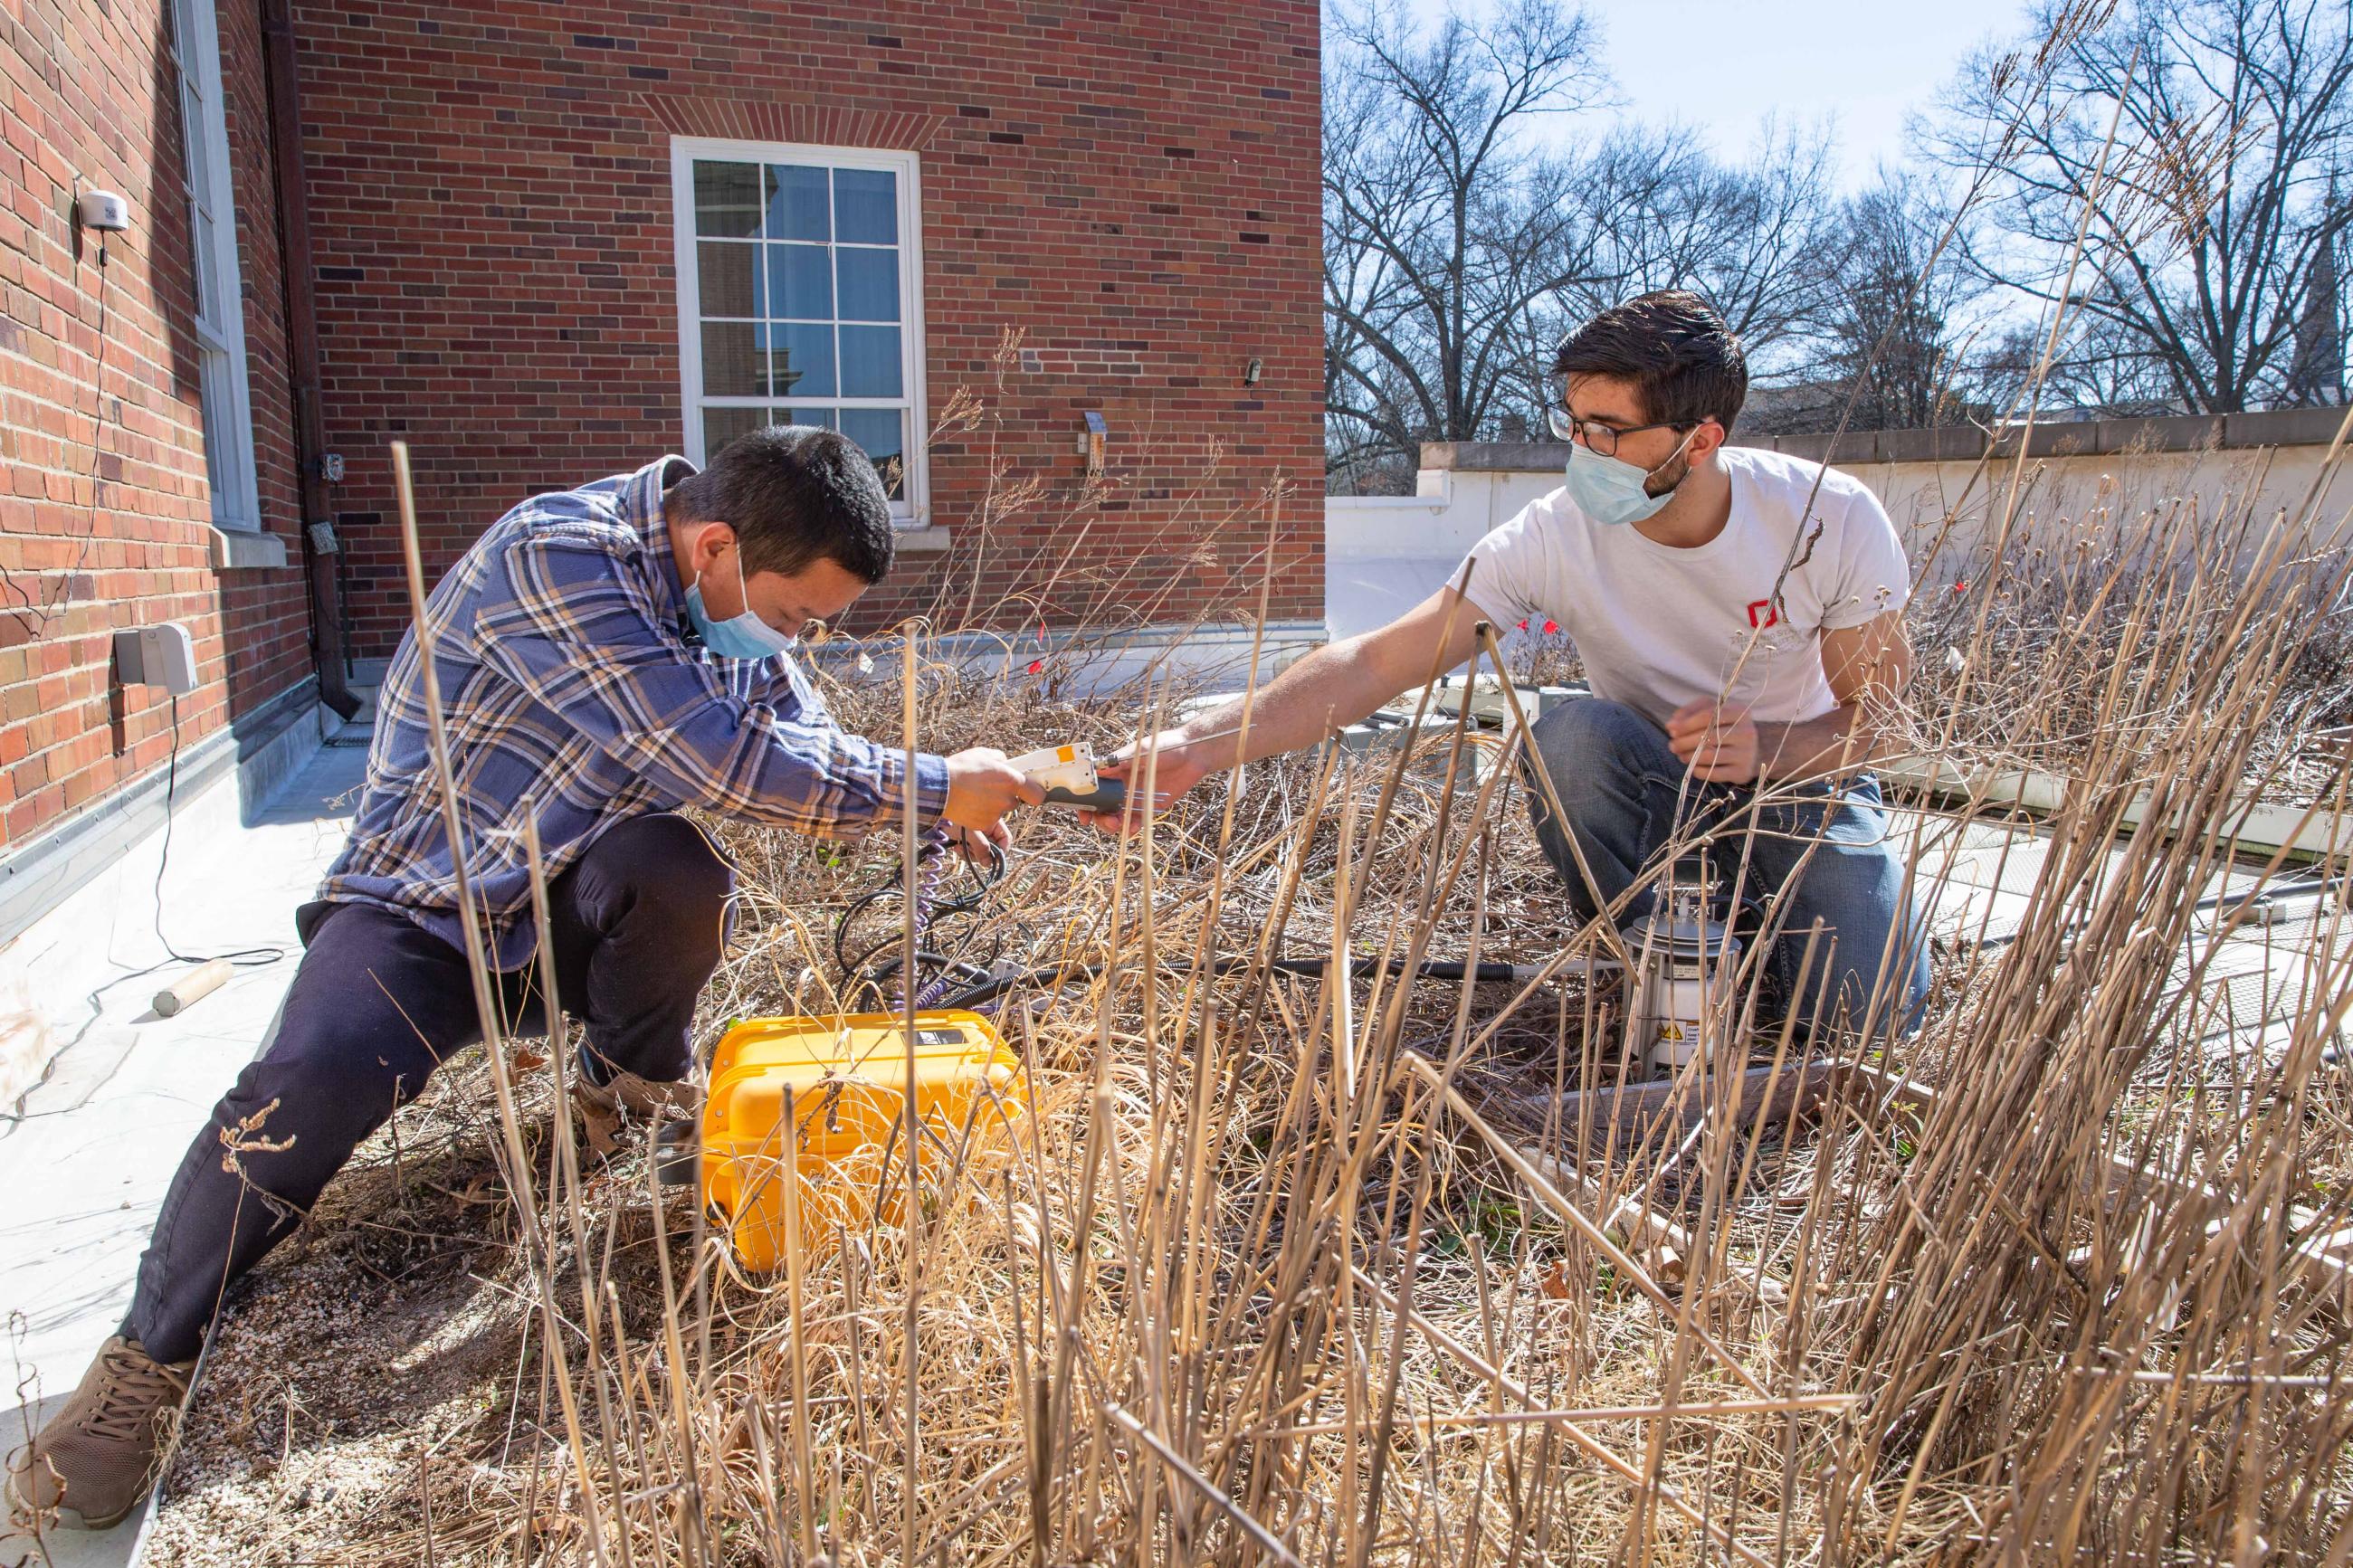 Researchers handle electronic instruments while kneeling in a plant bed on the Schoonover green roof.